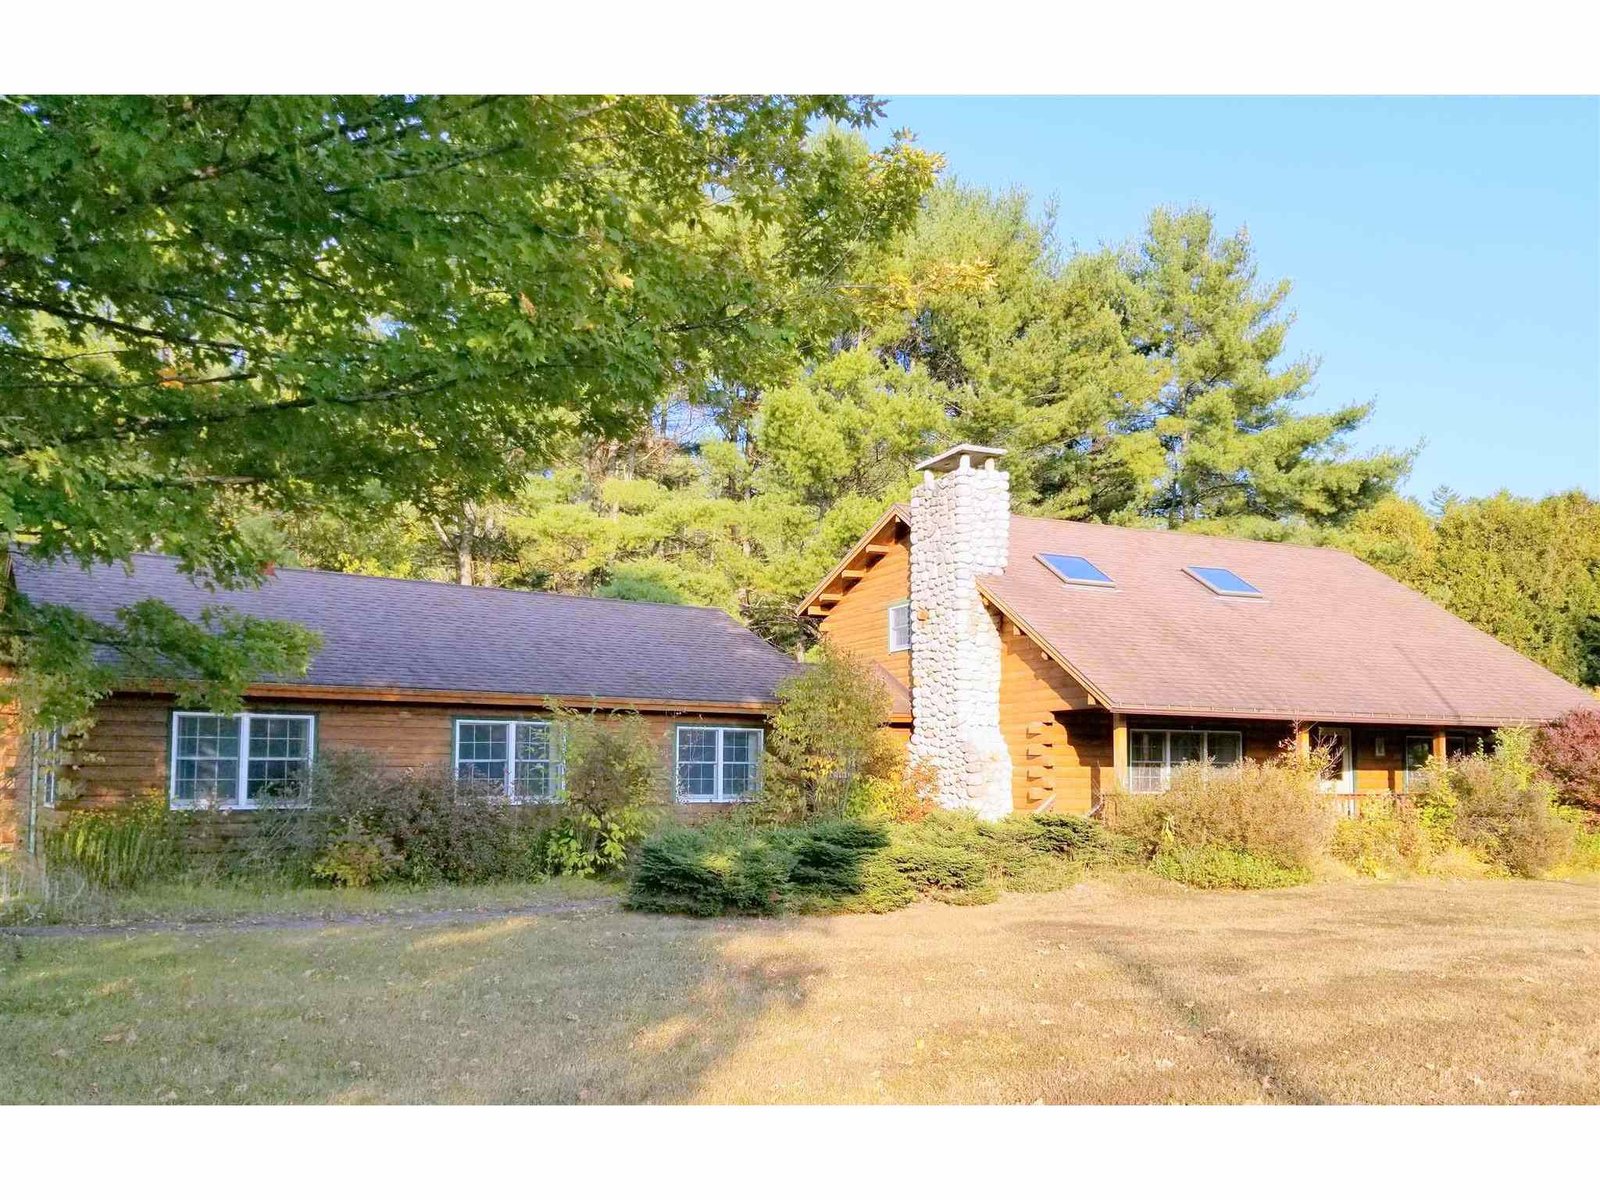 Sold property in Groton